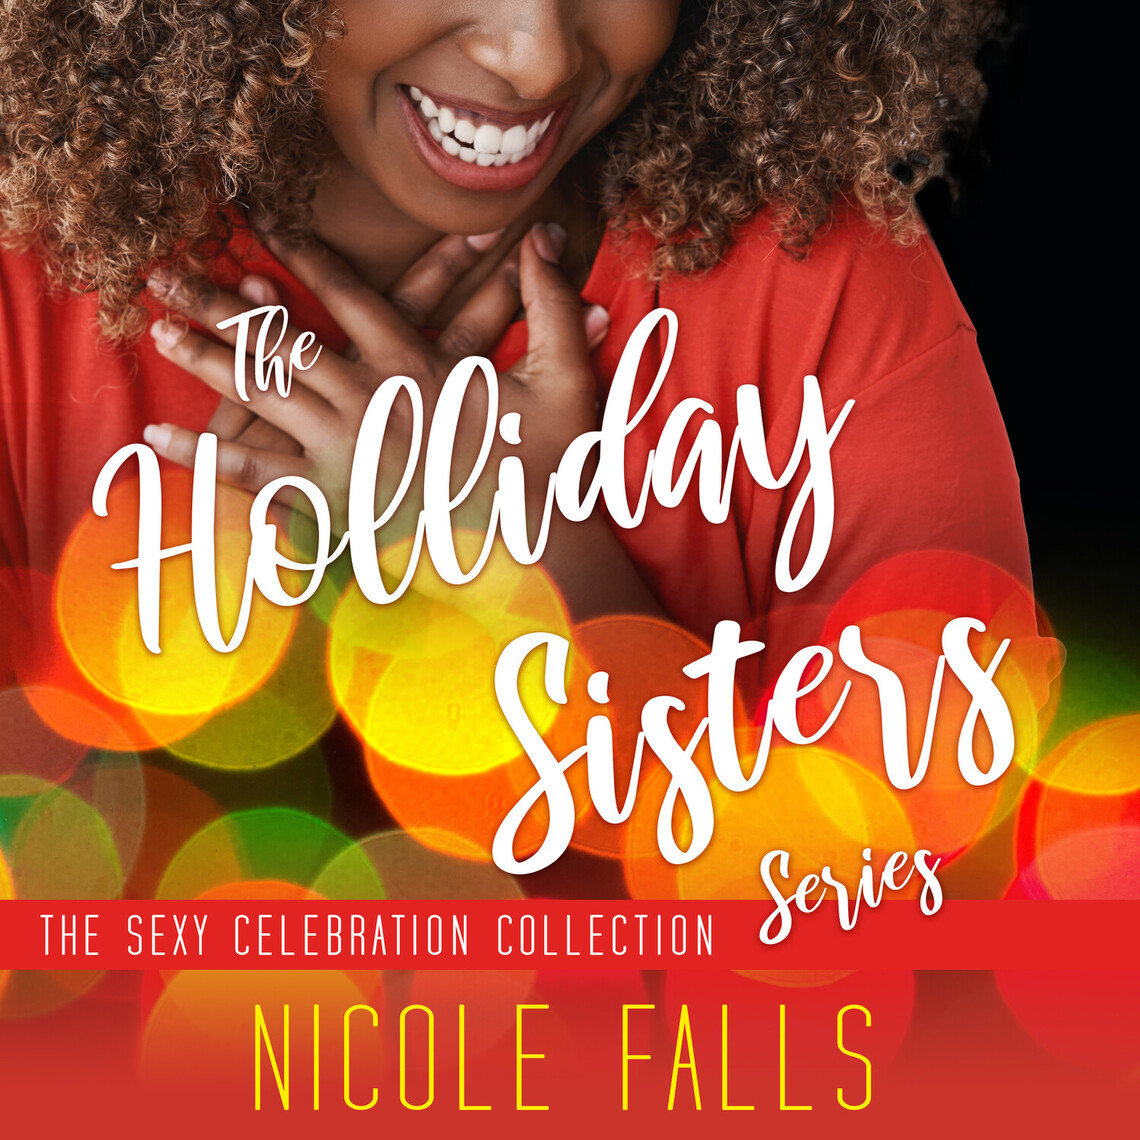 The Holliday Sisters Series by Nicole Falls image